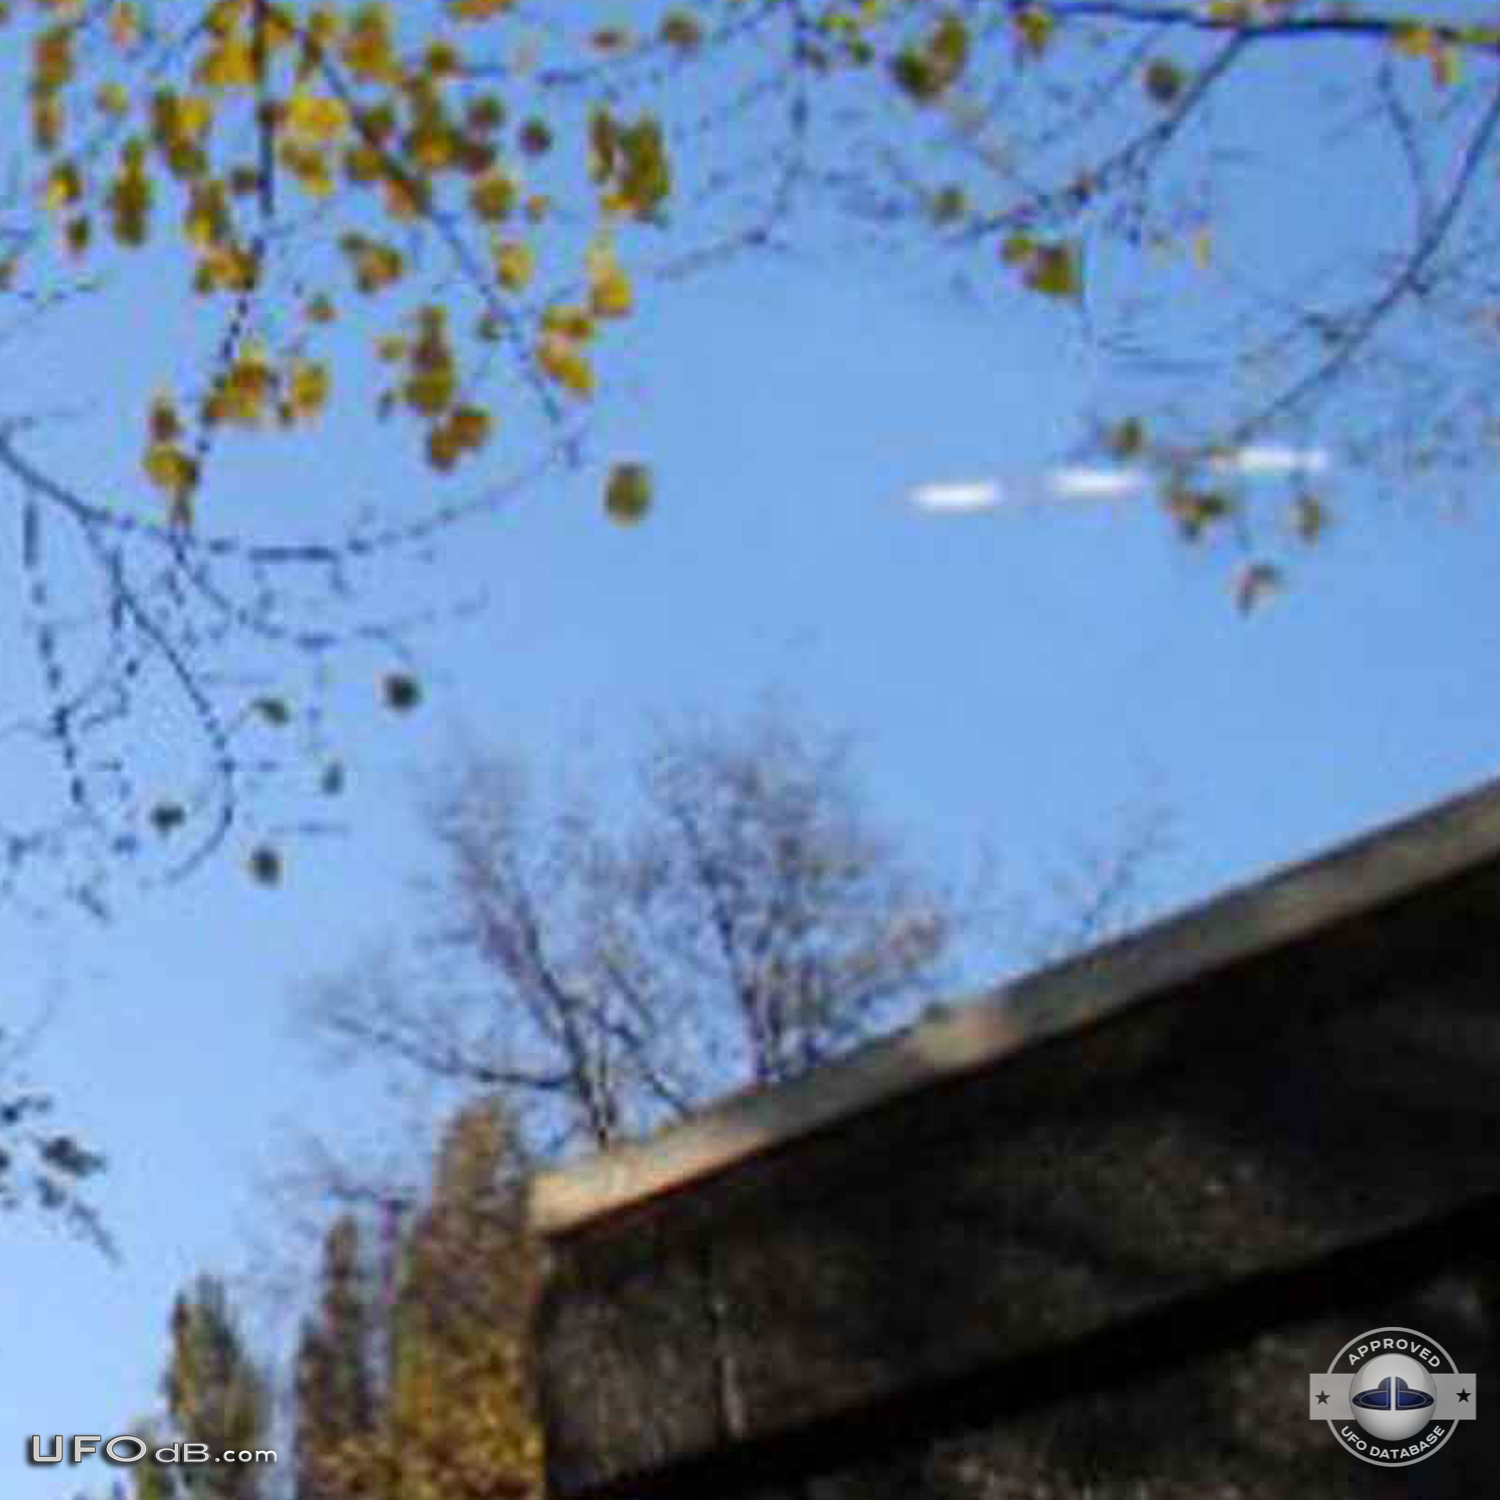 Fleet of 3 UFOs in formation caught on picture over Amsterdam in 2011 UFO Picture #378-4